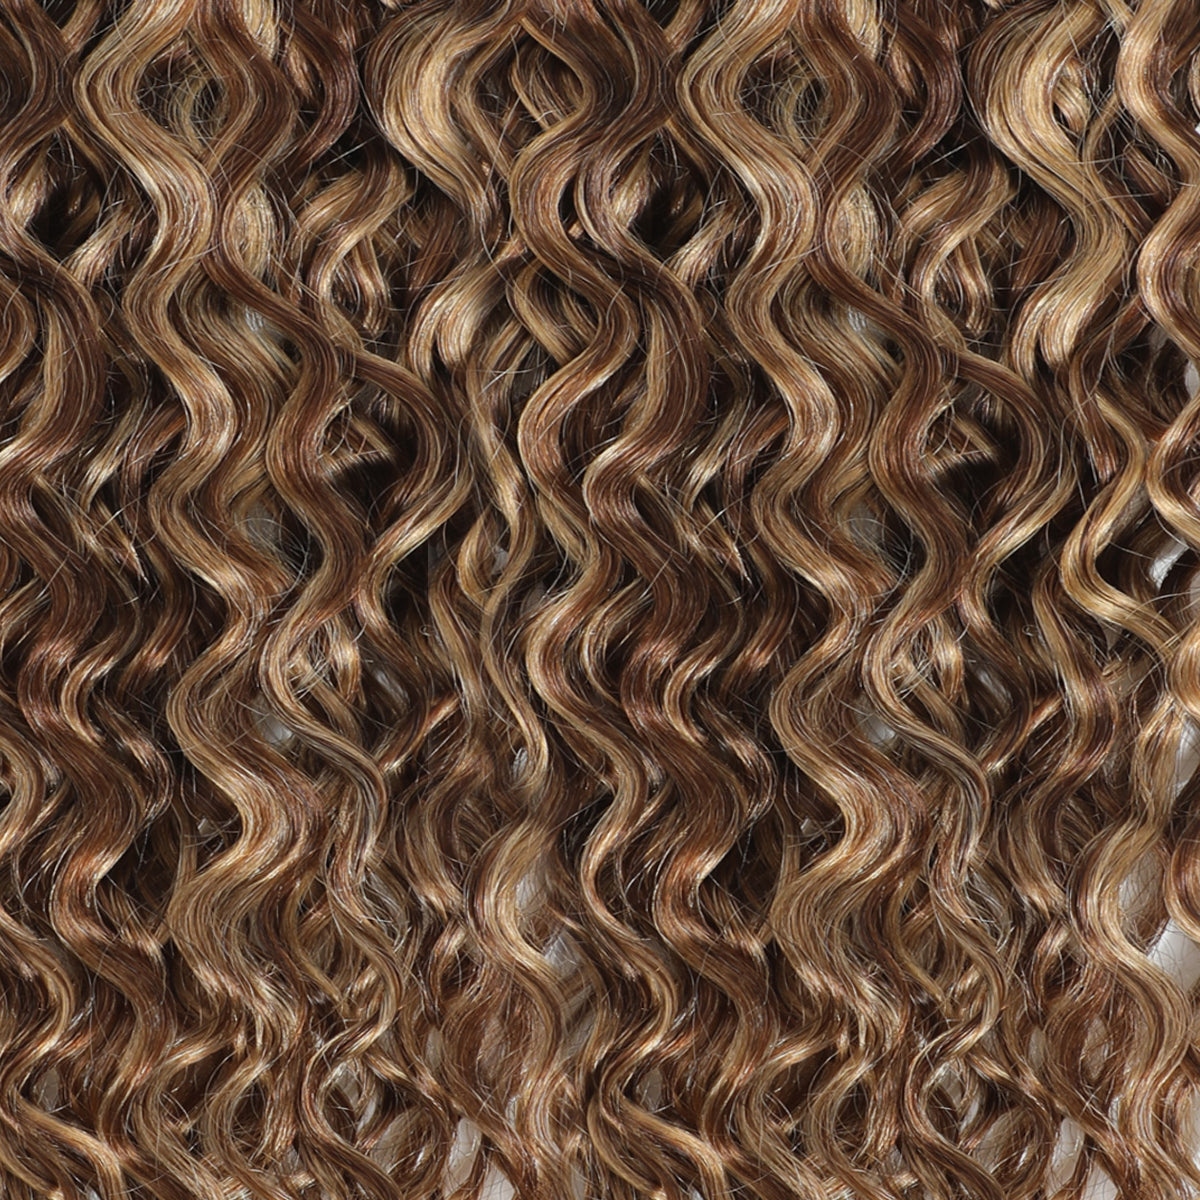 Weft Curly Hair Extensions  #4/27 Chestnut Brown and Bronzed Blonde Mix